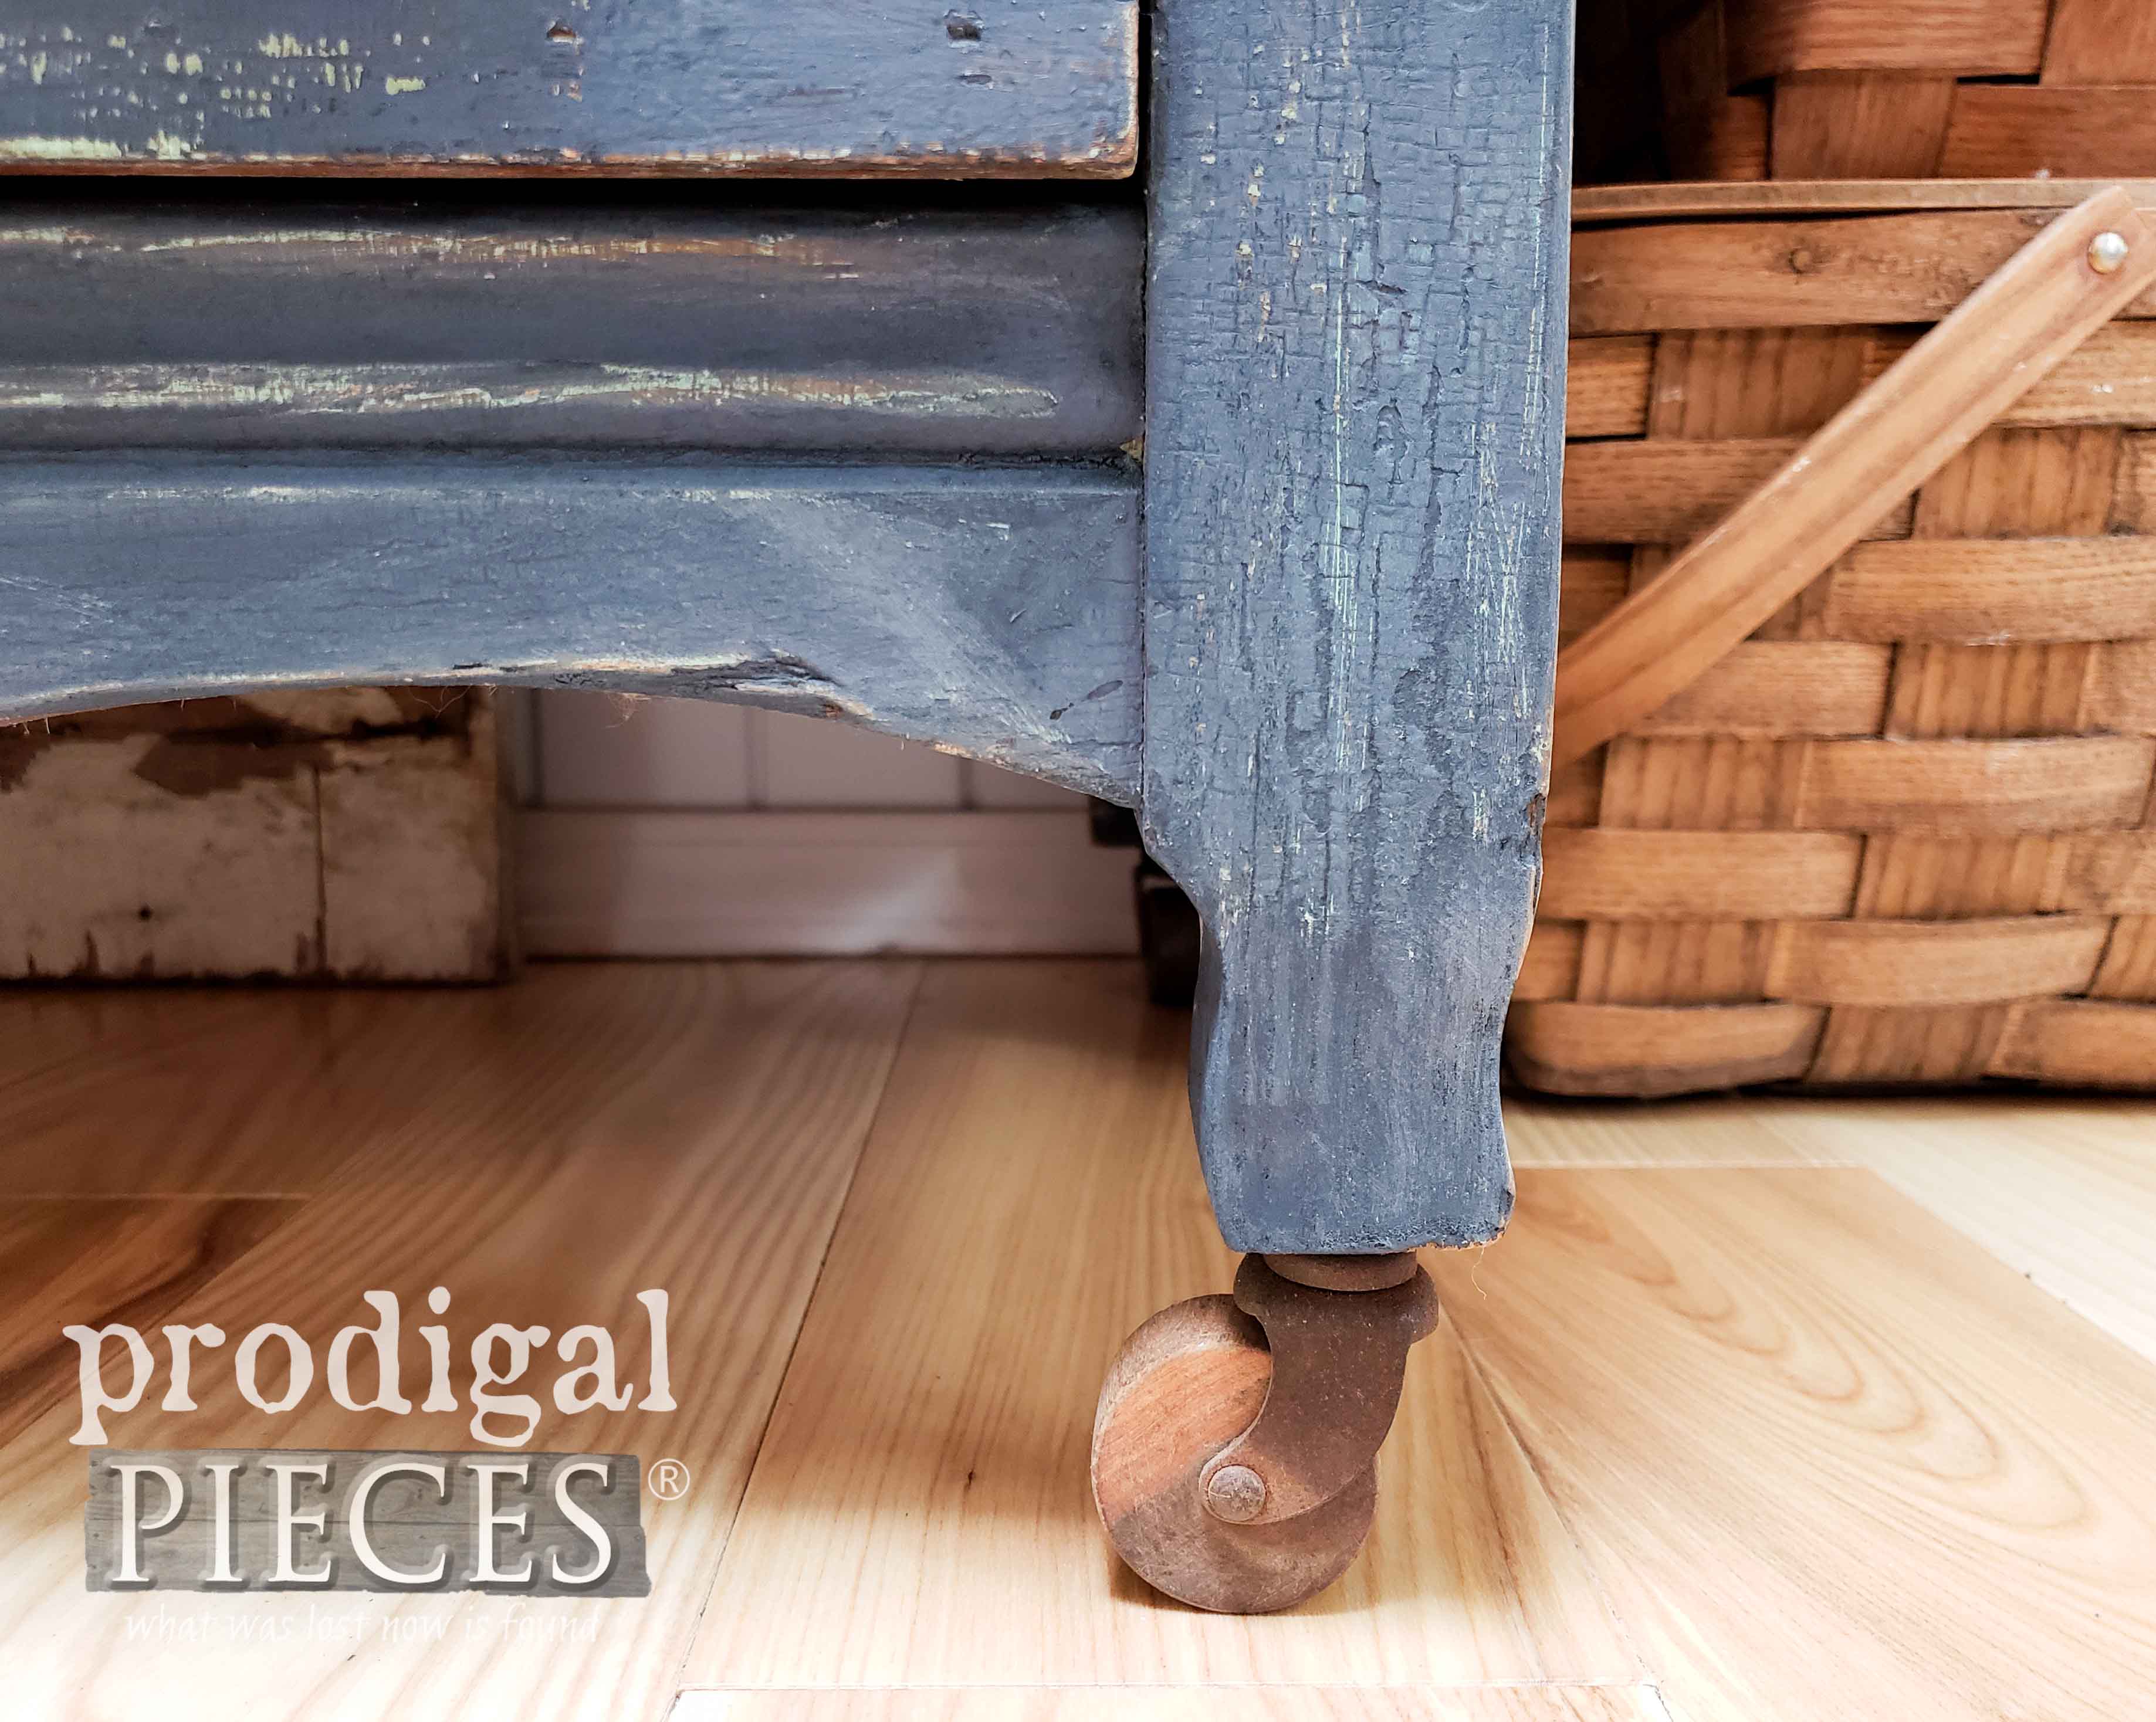 Antique Wooden Caster on Farmhouse Chest of Drawers by Larissa of Prodigal Pieces | prodigalpieces.com #prodigalpieces #farmhouse #furniture #diy #vintage